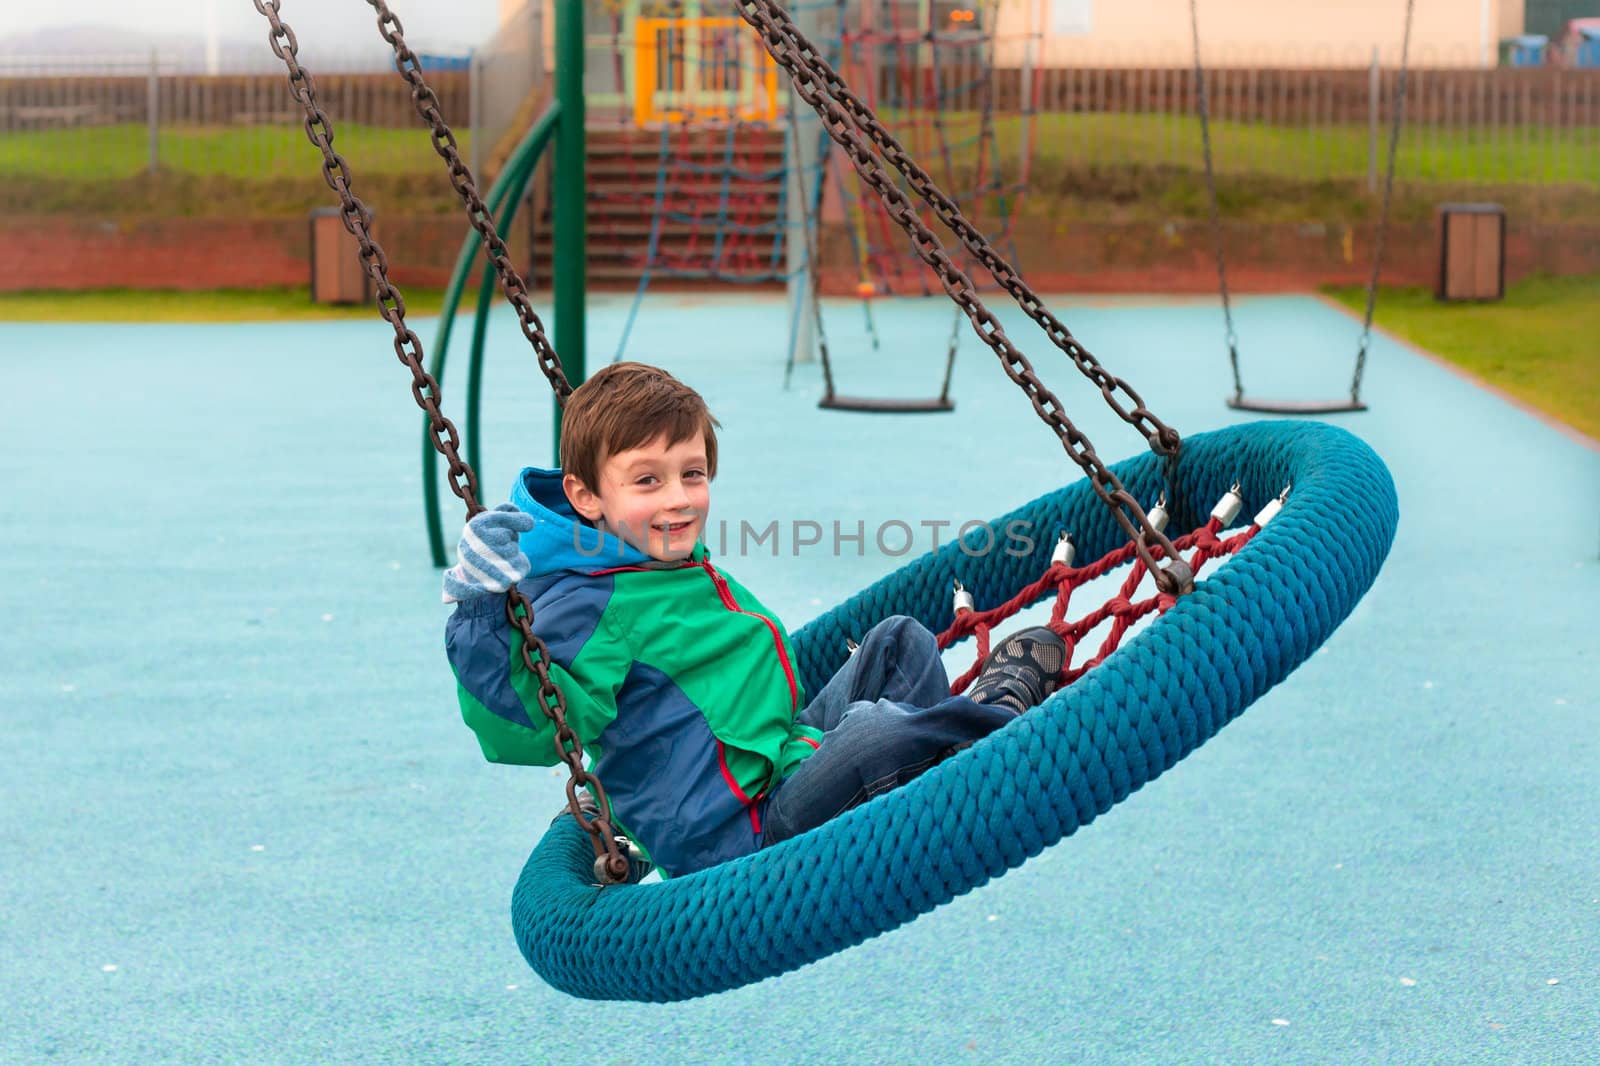 A happy young boy playing on a park swing